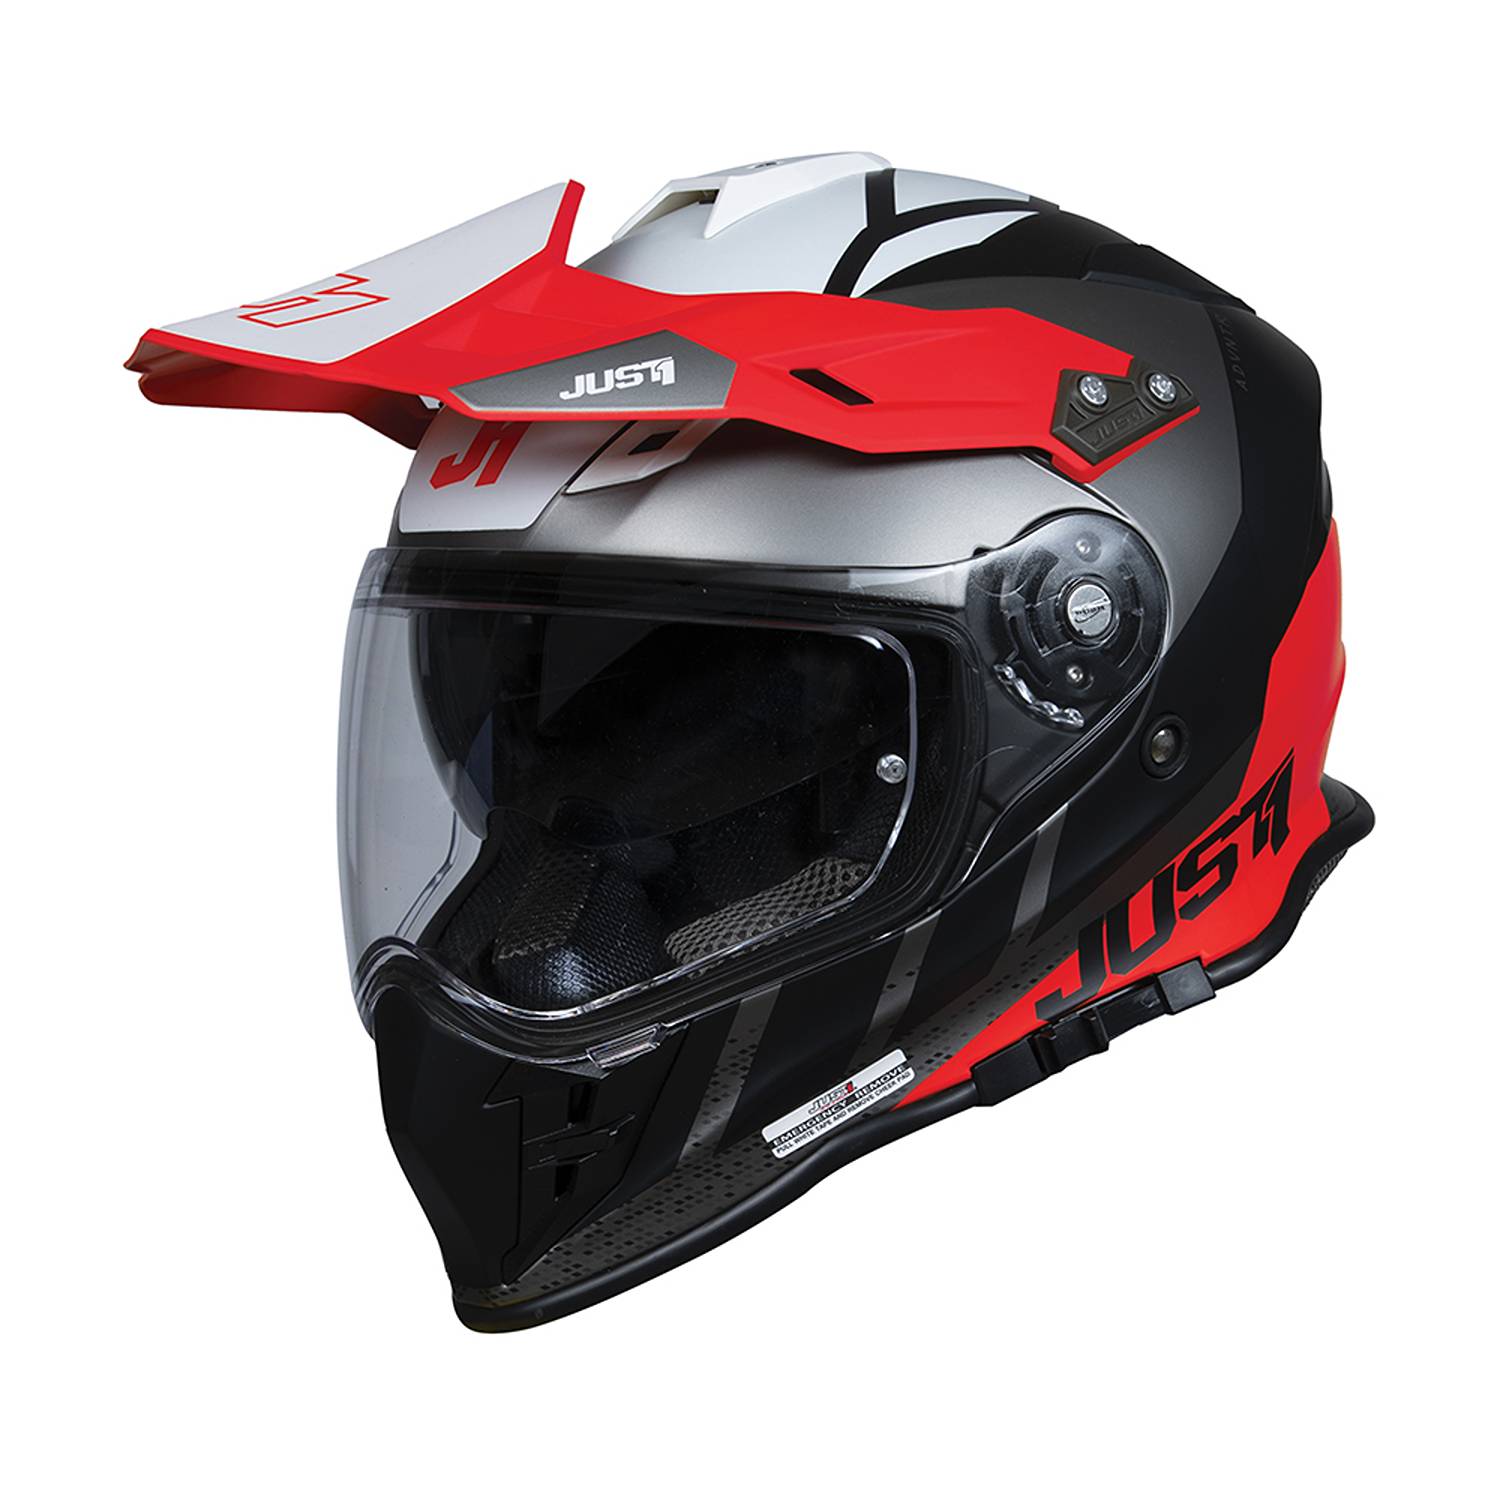 Image of Just1 J34 Pro Outerspace Black Red White Adventure Helmet Size S EN